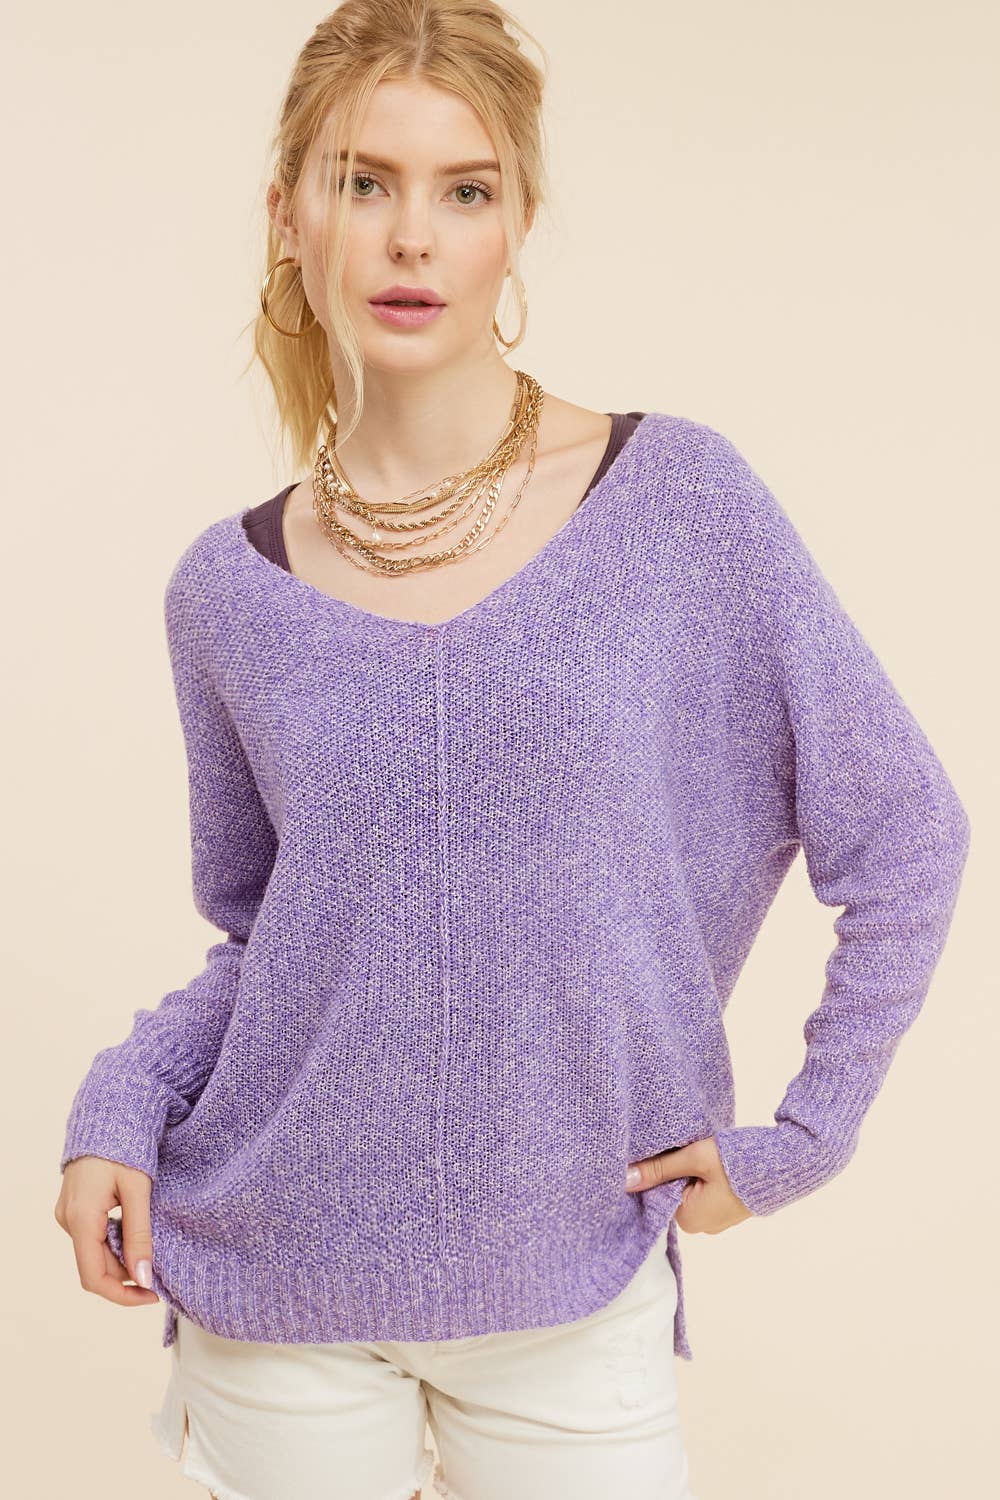 Lightweight Loose Fit Spring Fall Sweater Candy